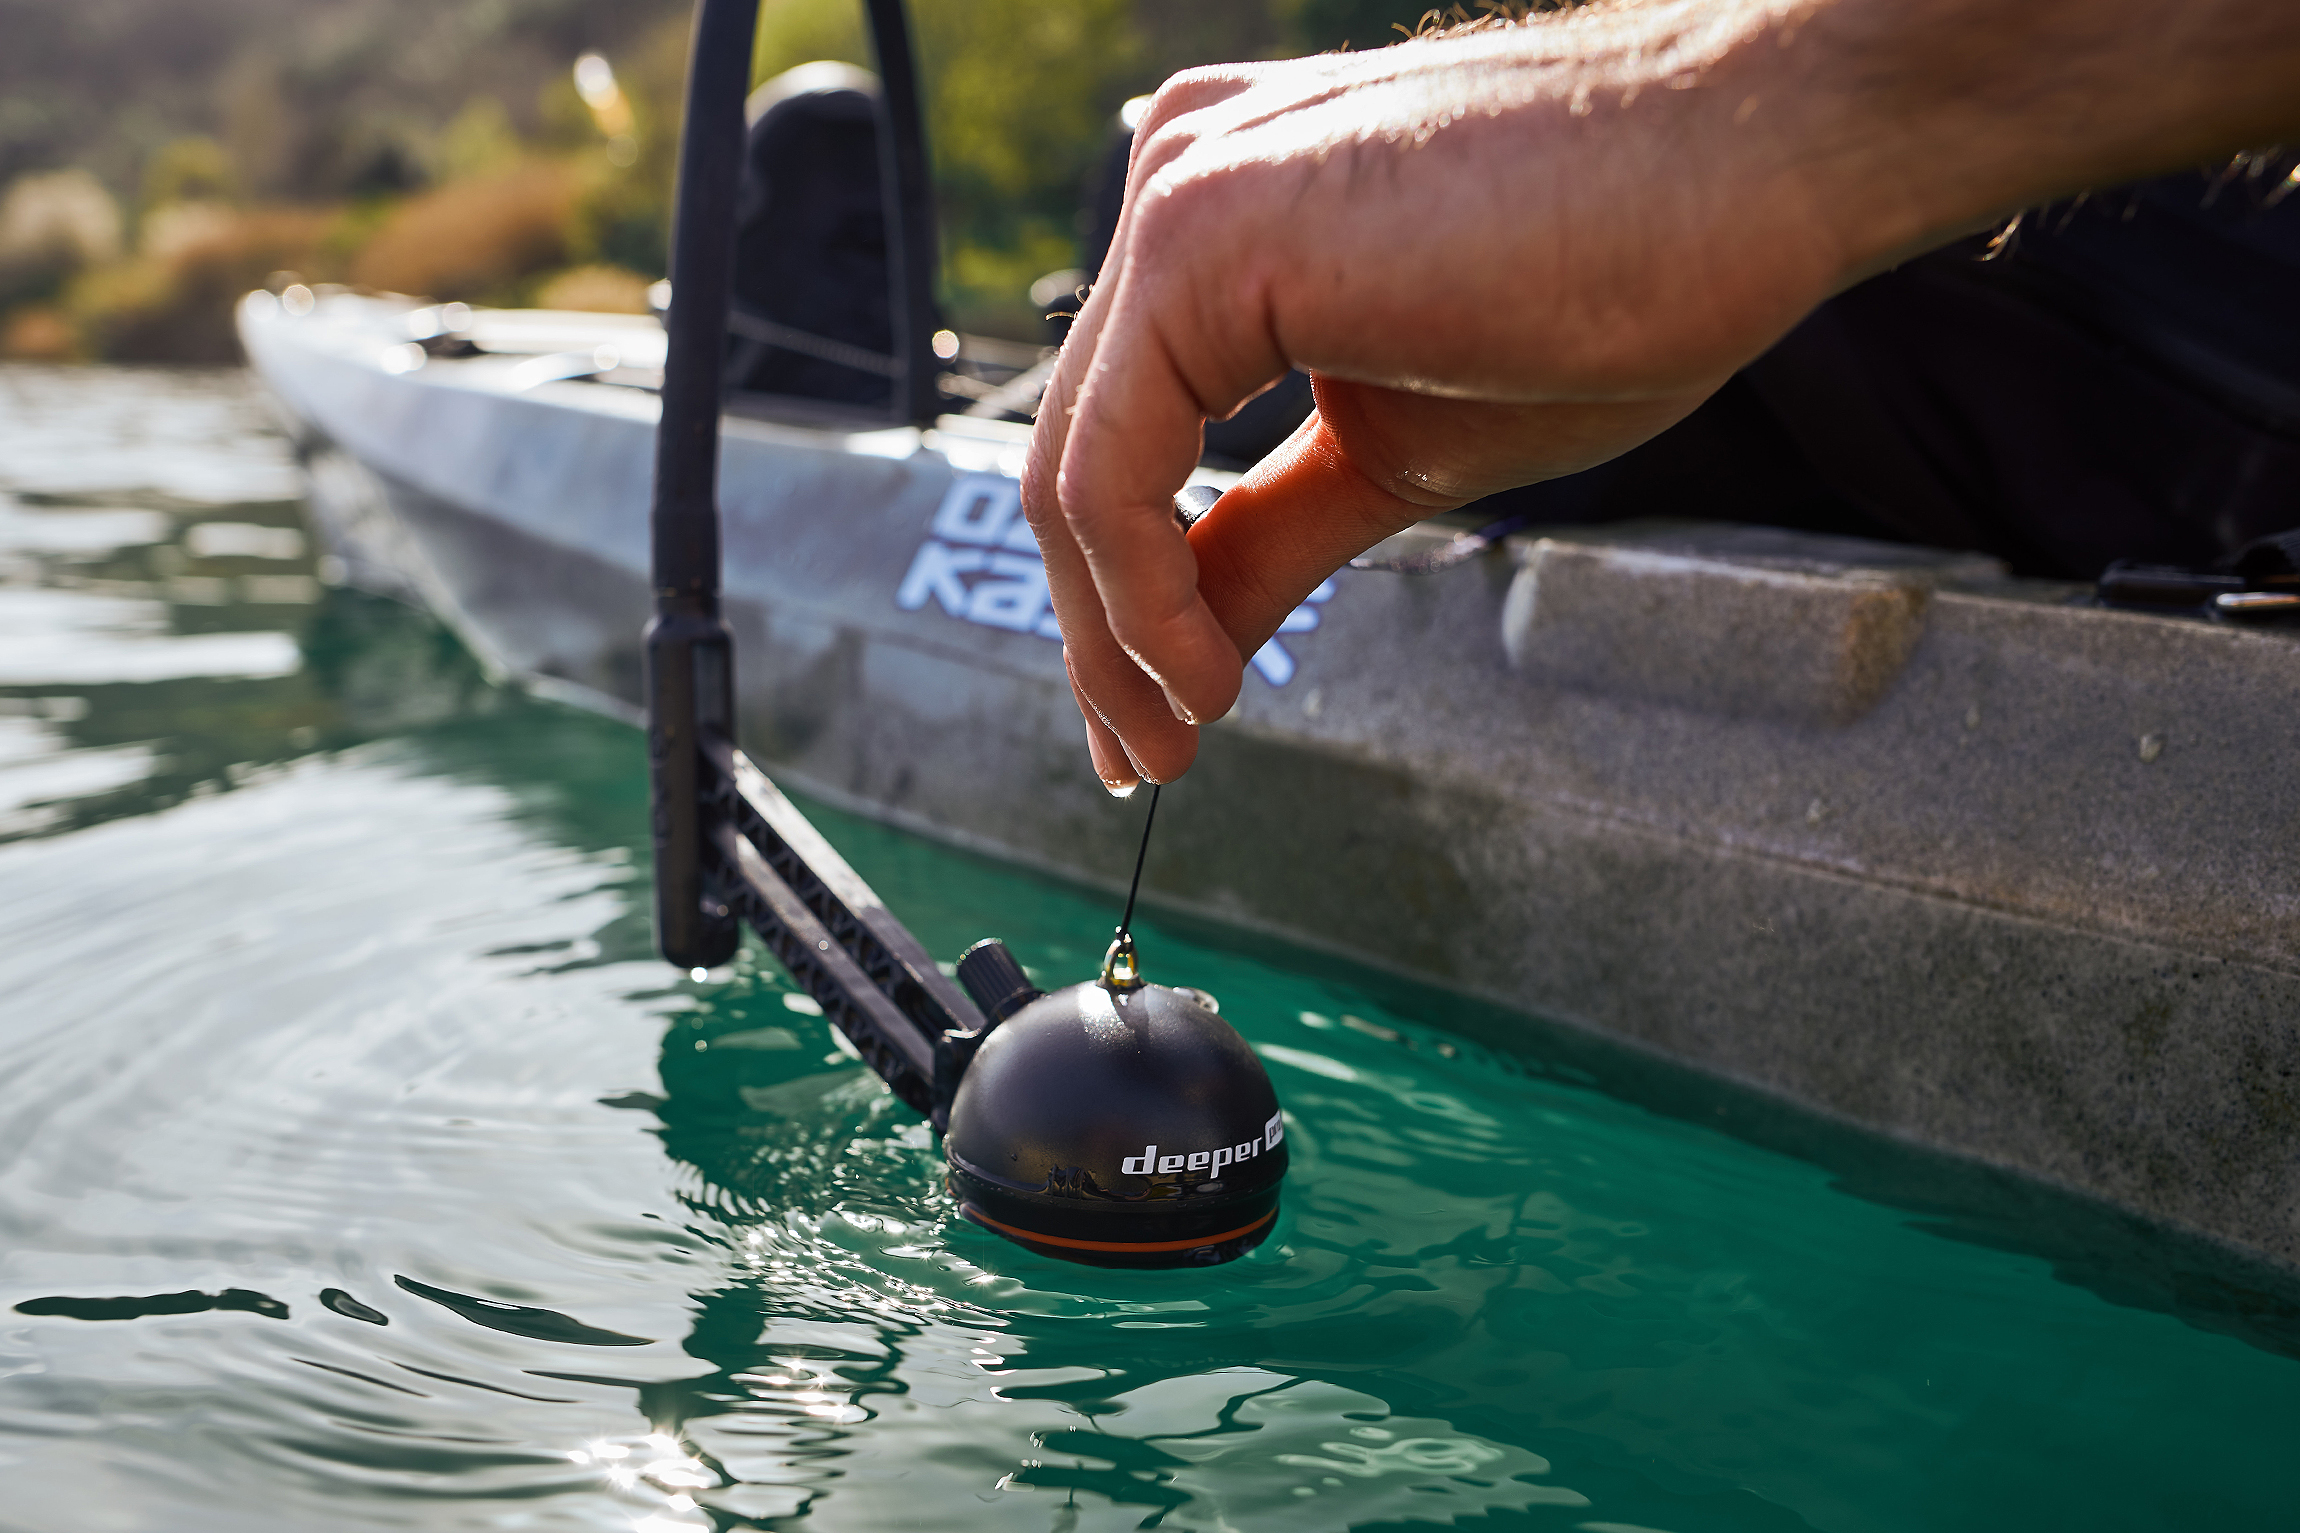 Deeper, Deeper Sonar PRO+ with GPS for Professional Fishing